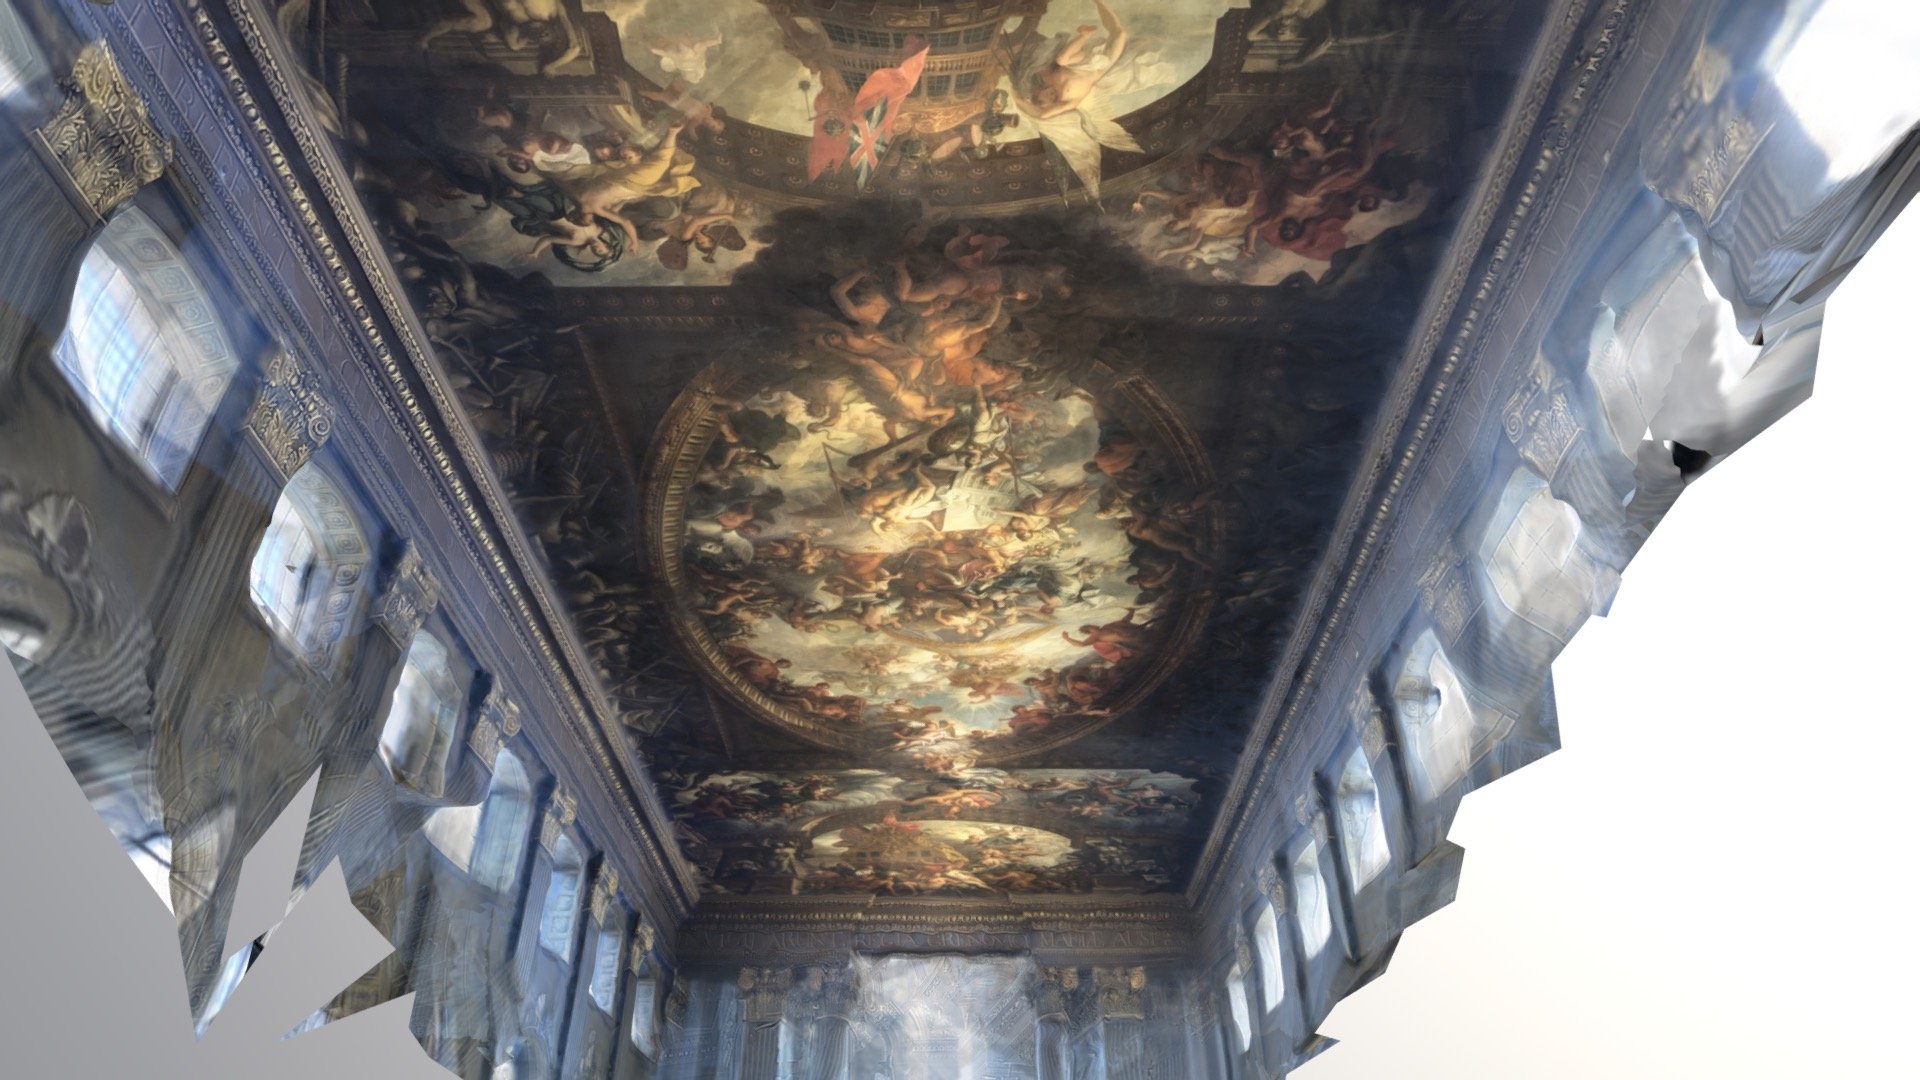 Painted Hall Greenwich